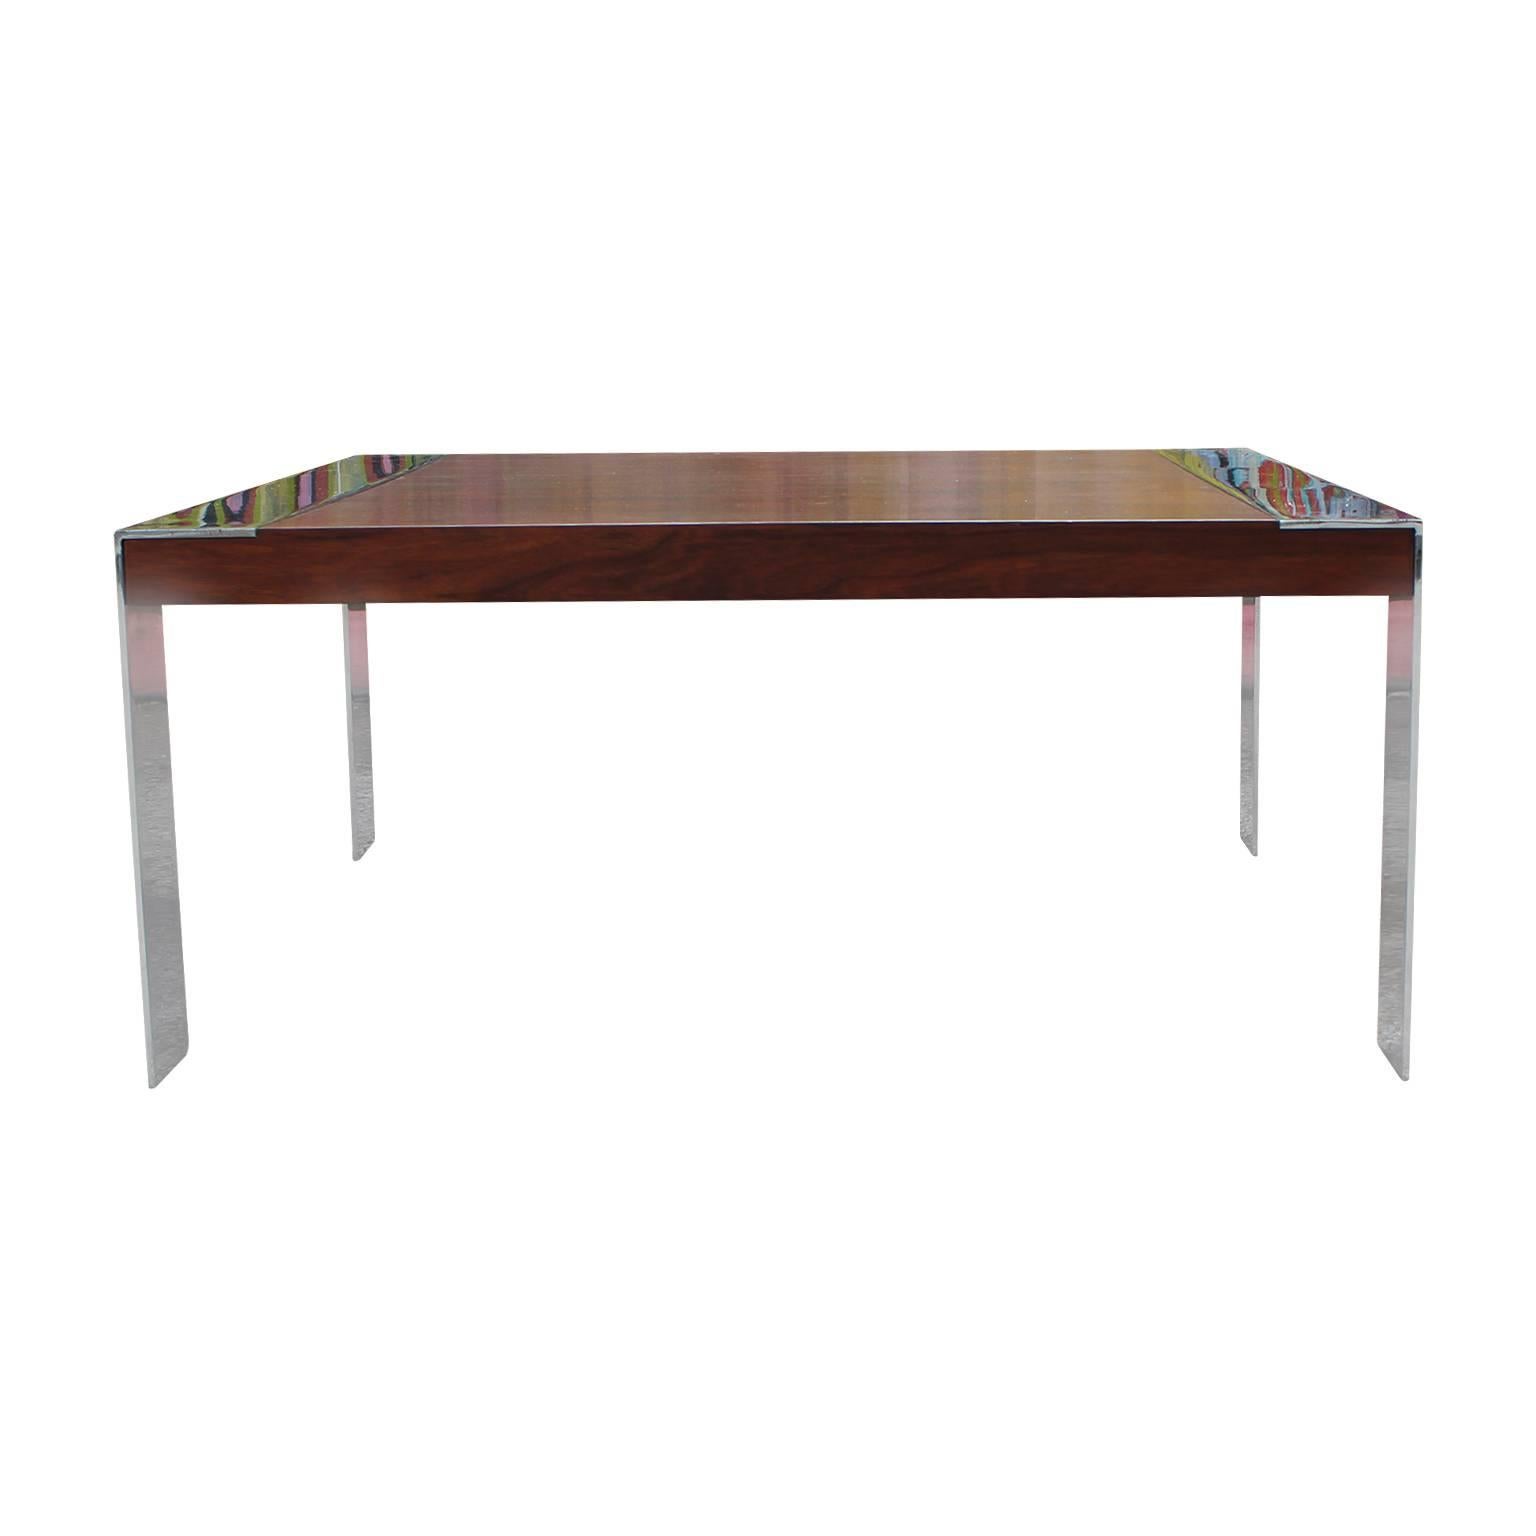 Gorgeous square coffee table featuring chrome legs and a rosewood top in the style of Milo Baughman circa 1970s. The chrome is heavy and shiny. In excellent vintage condition.